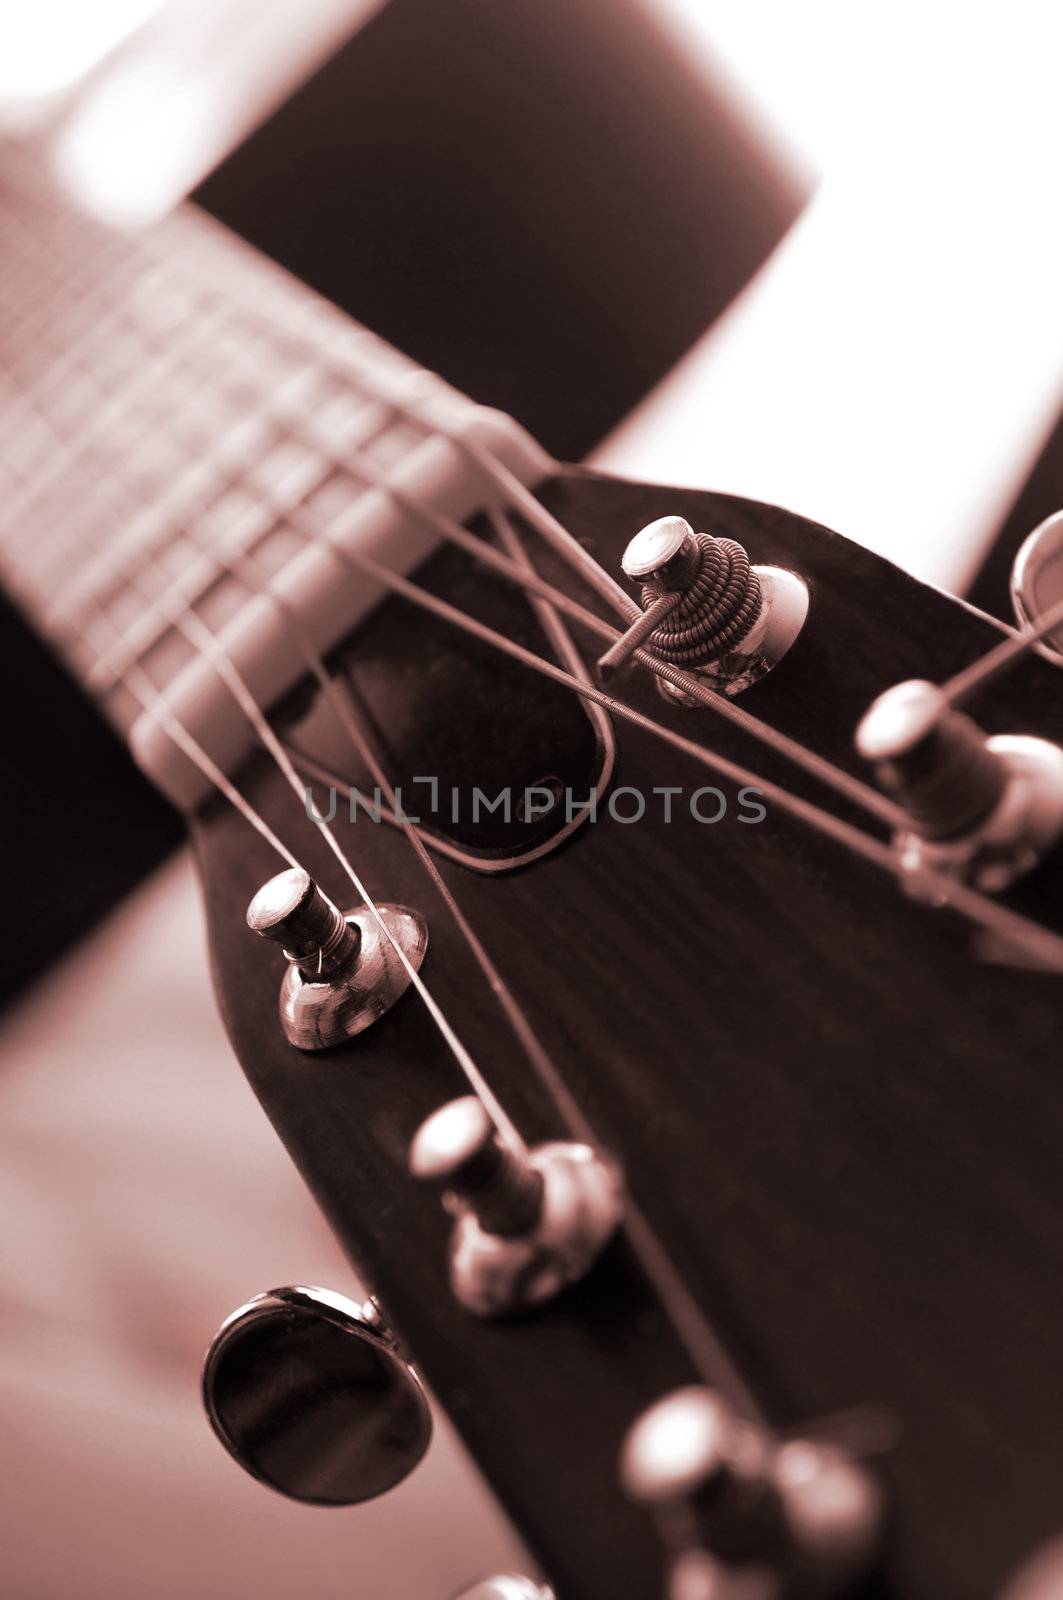 Guitar close up by elenathewise